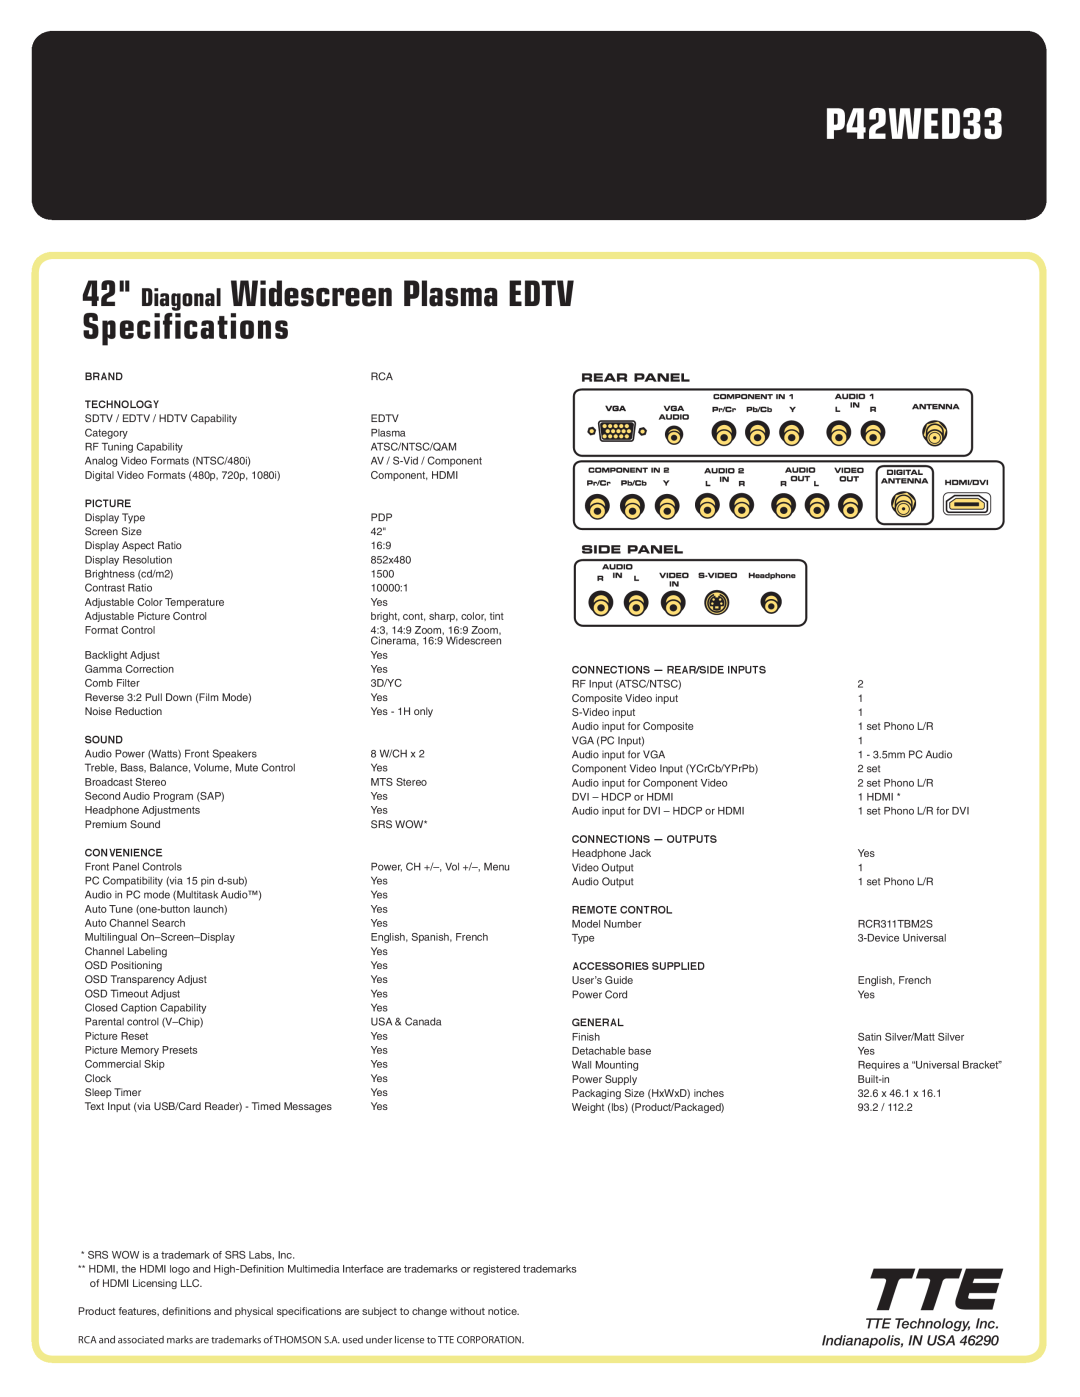 RCA P42WED33 manual Diagonal Widescreen Plasma EDTV Specifications, TTE Technology, Inc. Indianapolis, IN USA 